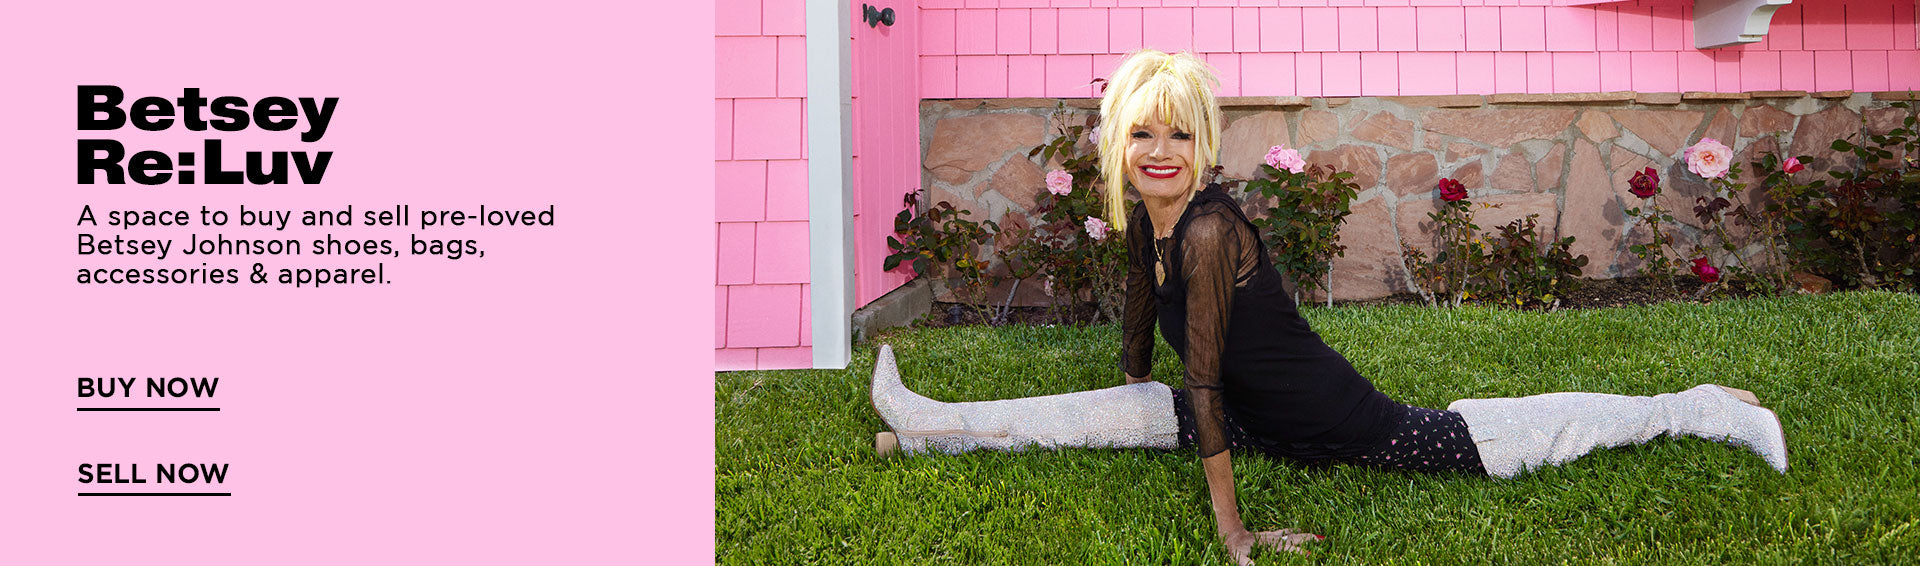 Betsey Johnson Discounts and Cash Back for Everyone